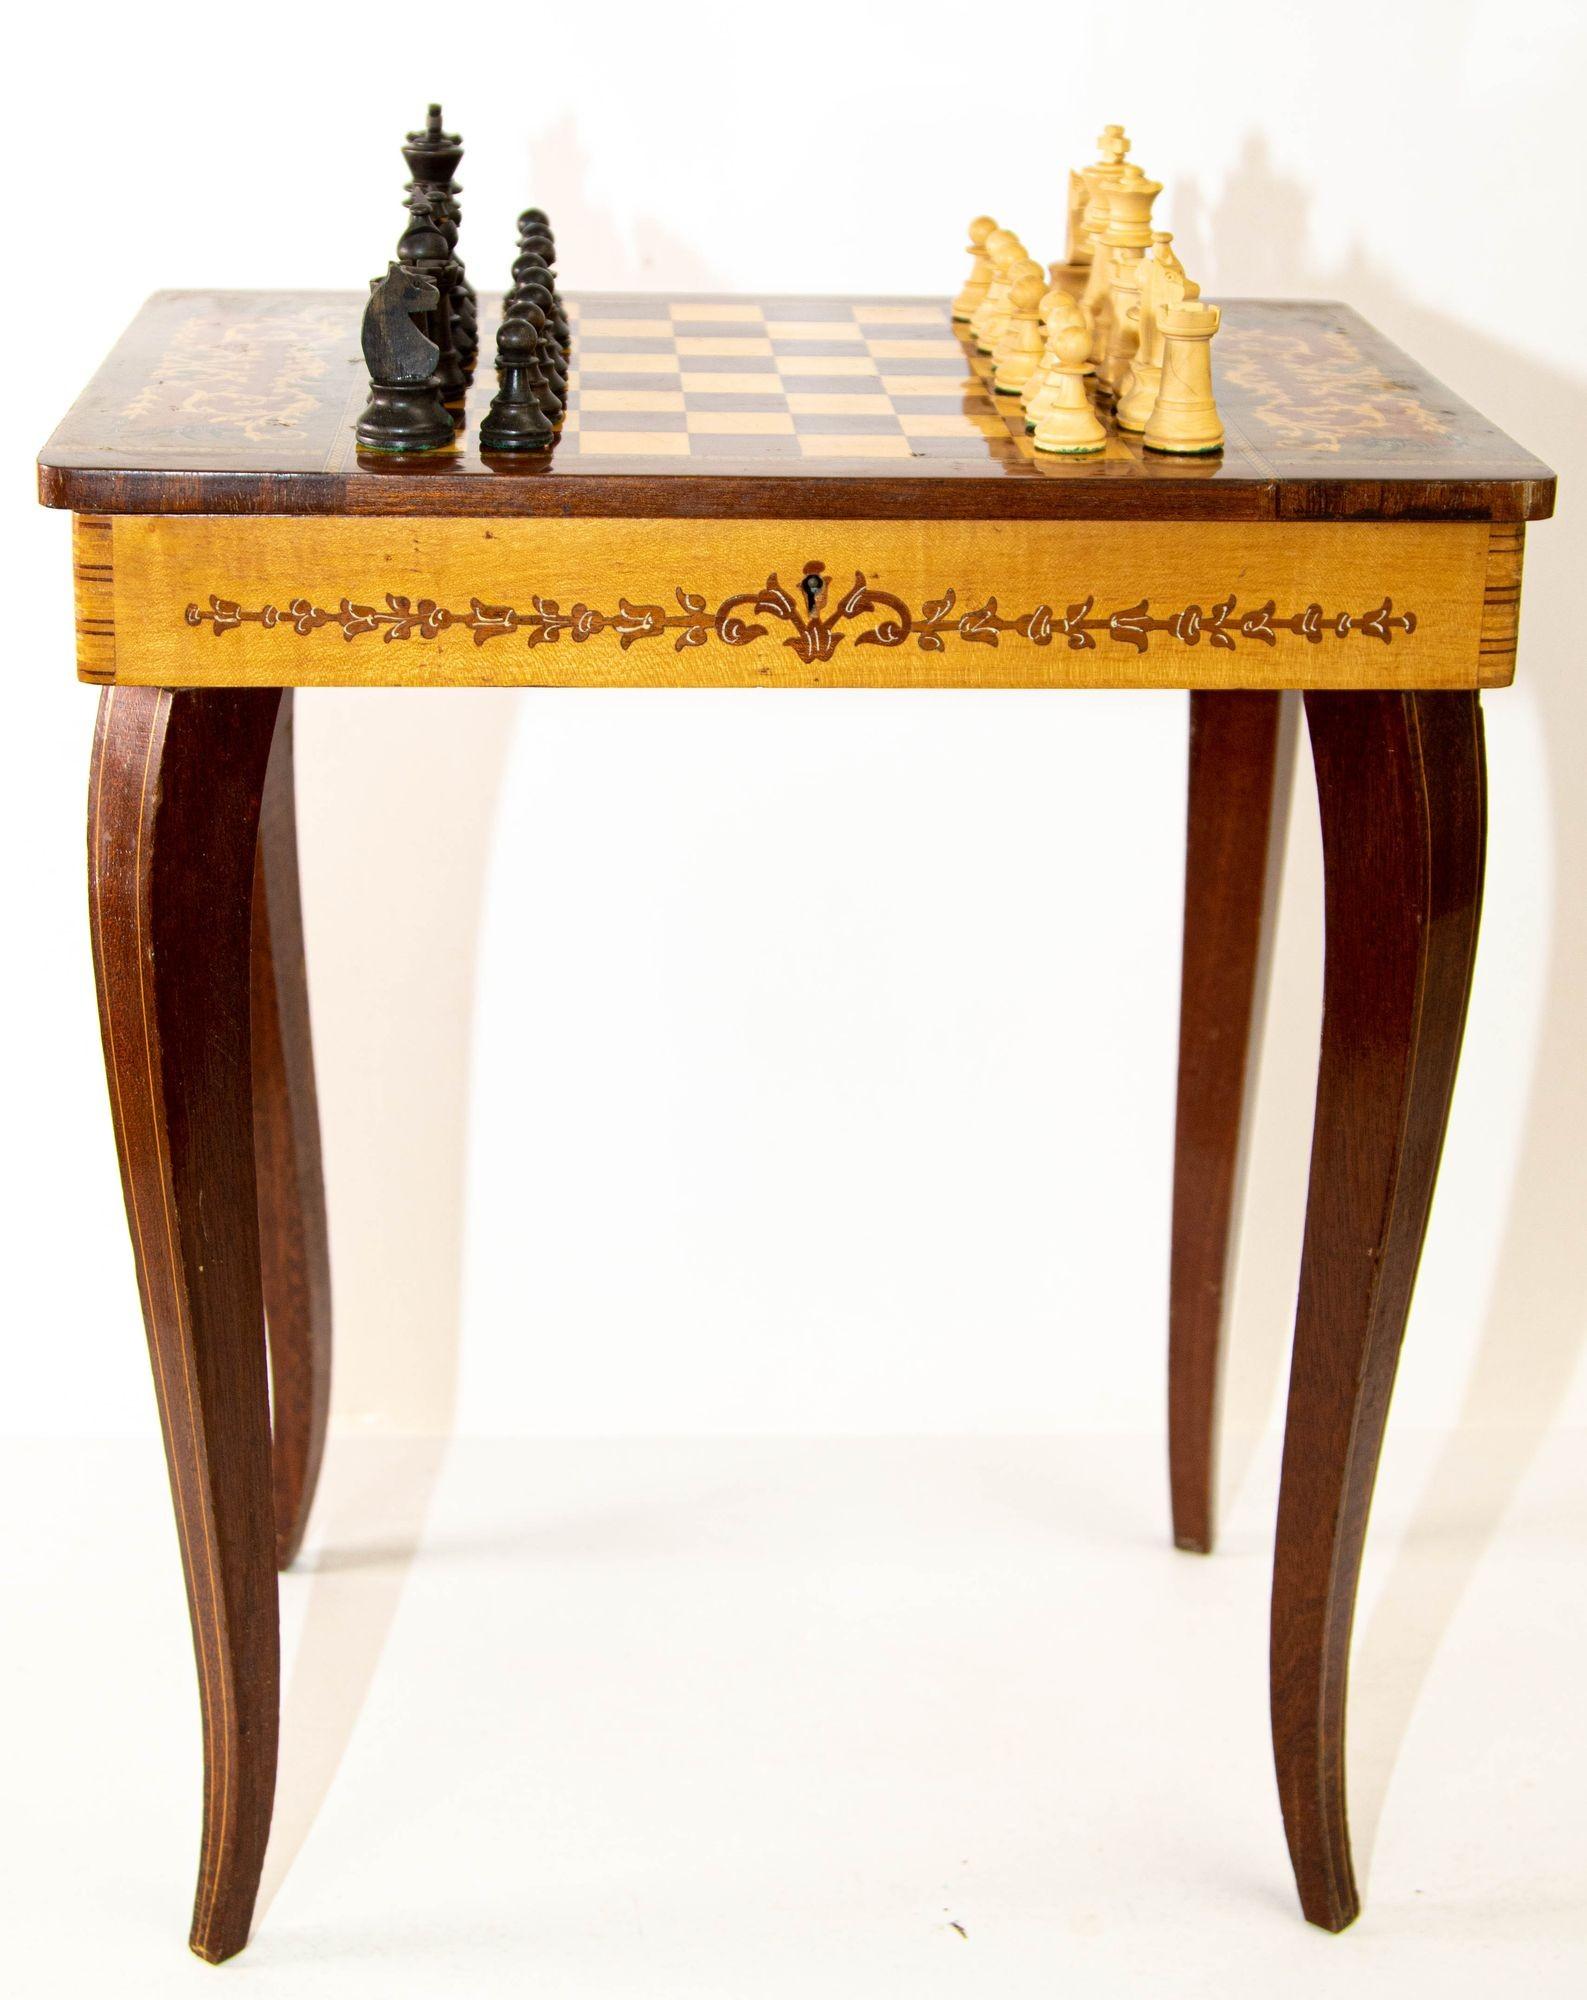 Vintage Italian Rococo Style Satinwood Inlaid Marquetry Music Box Side table, Chess Game Table.
A small, Italian Rococo style rectangular wood side or end table with a beautifully decorative satinwood inlaid marquetry chess top, cabriolet legs and